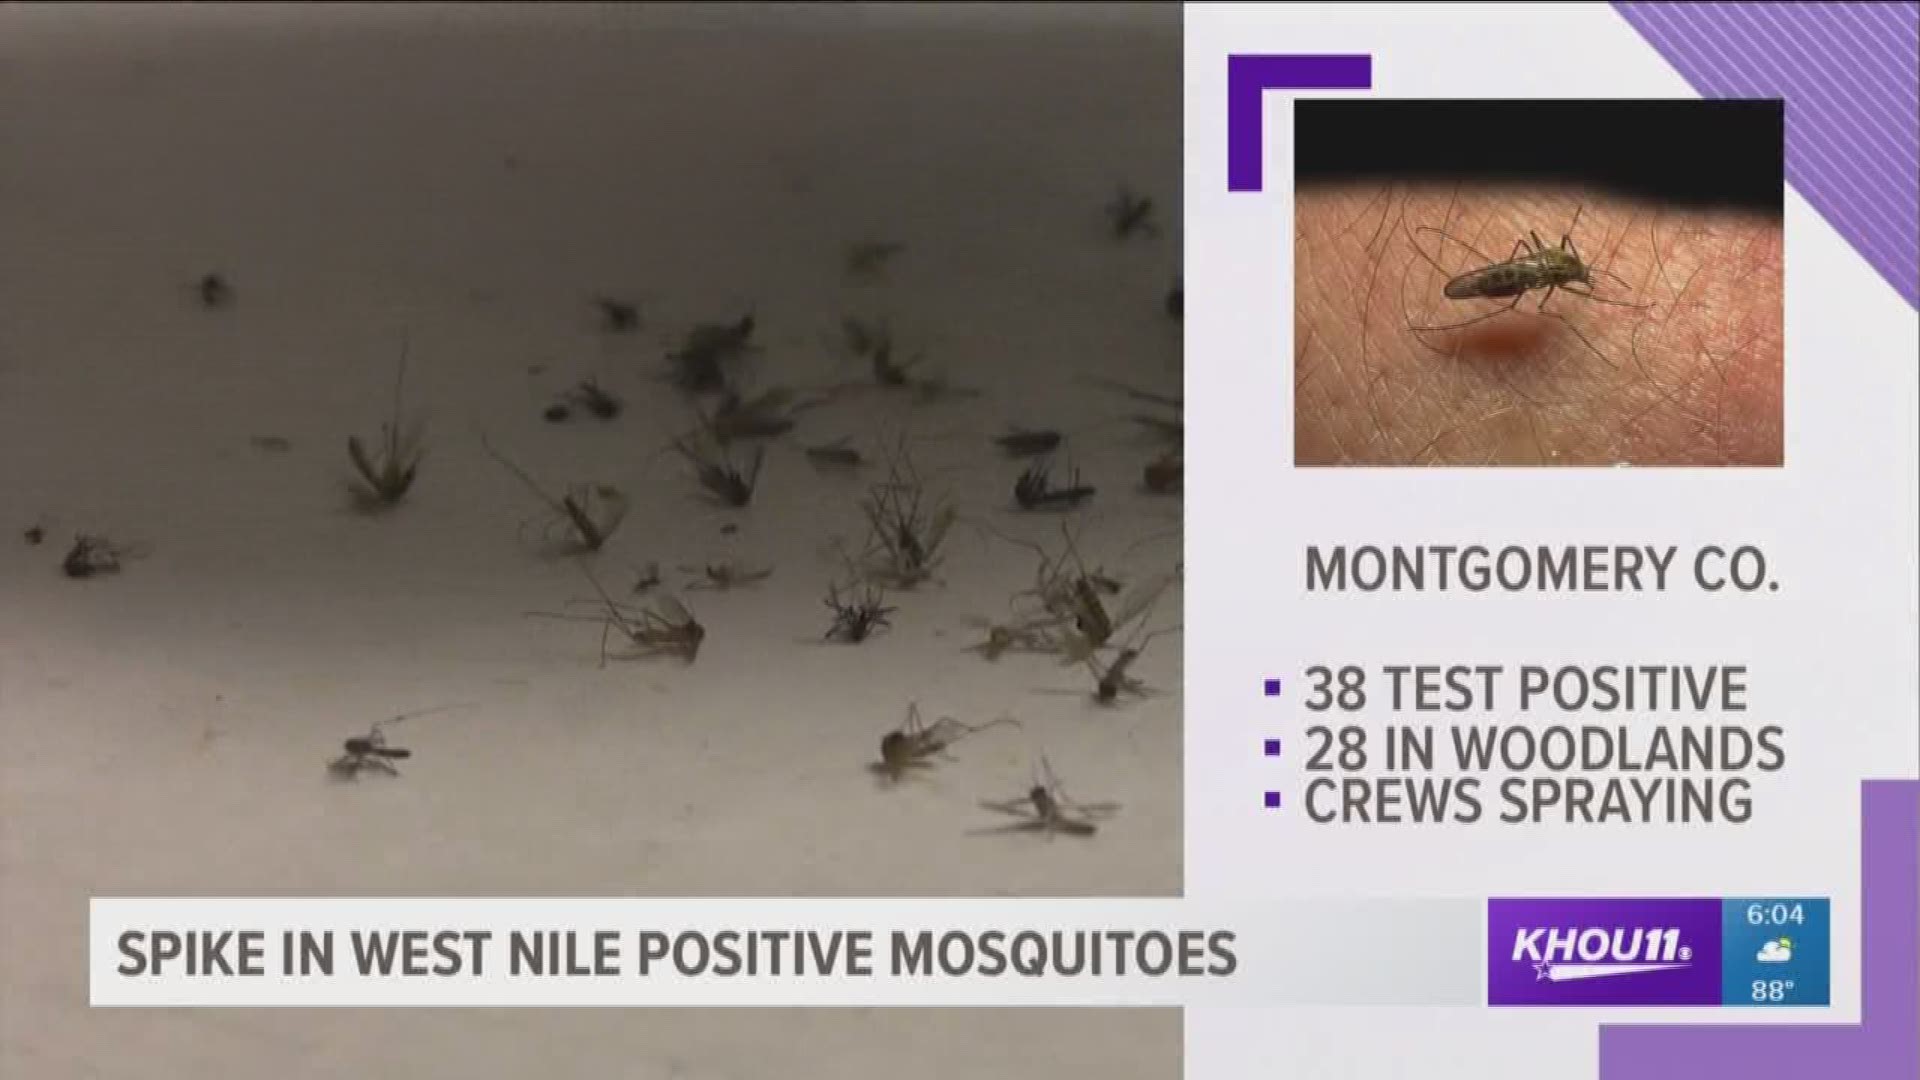 Montgomery County officials warn of spike in West Nile positive mosquitoes